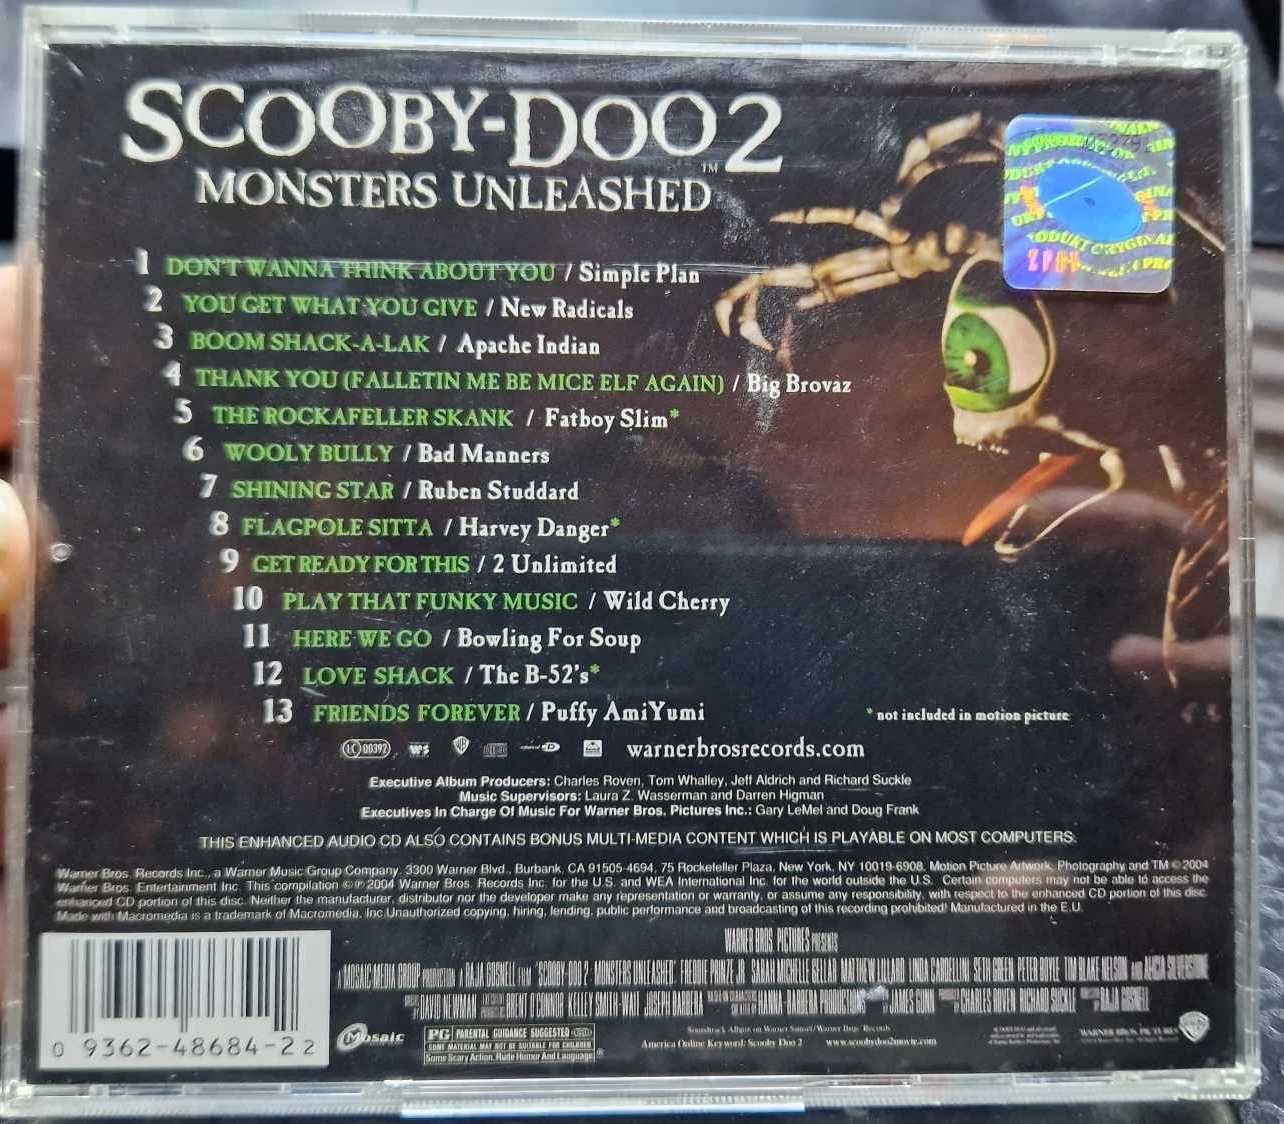 Scooby Doo Monsters Unleashed - CD OST Soundtrack